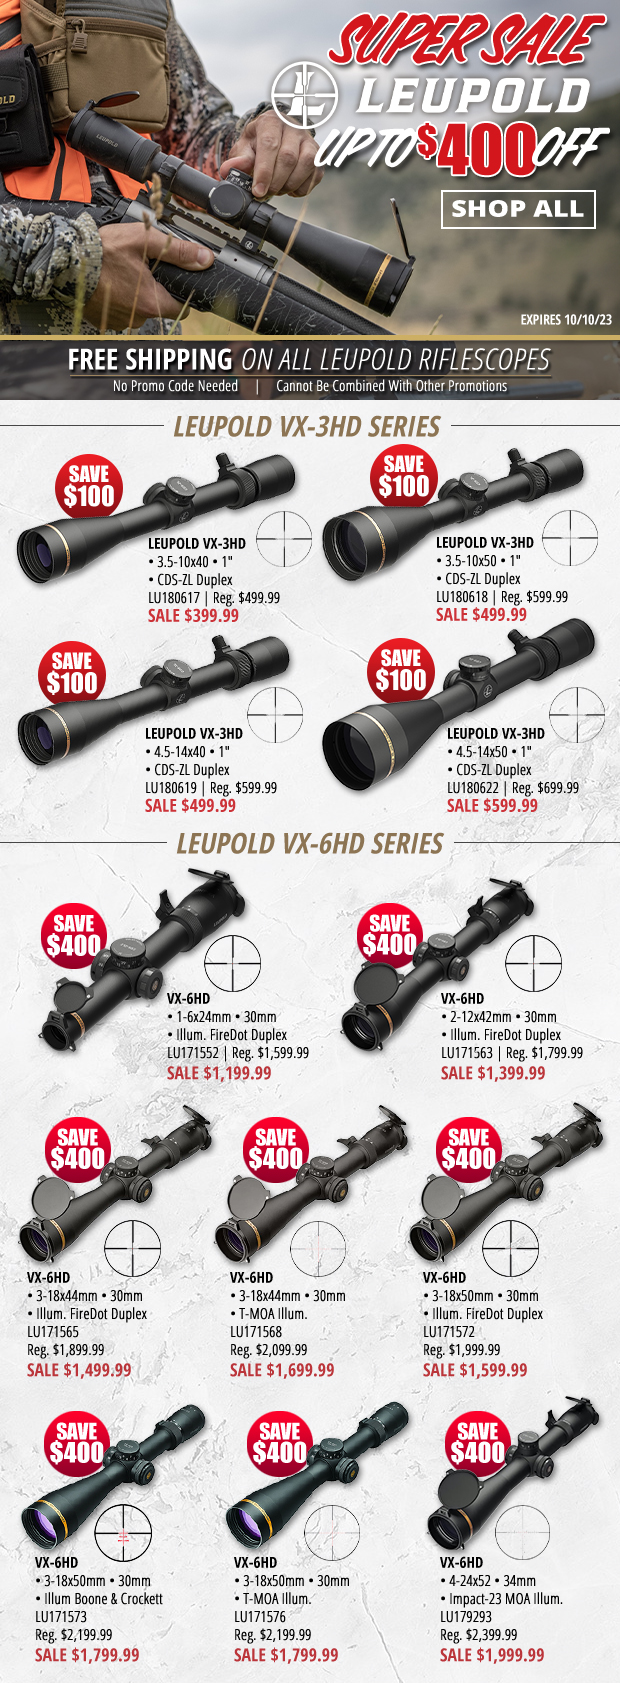 Up to $400 off at Our Leupold Super Sale!